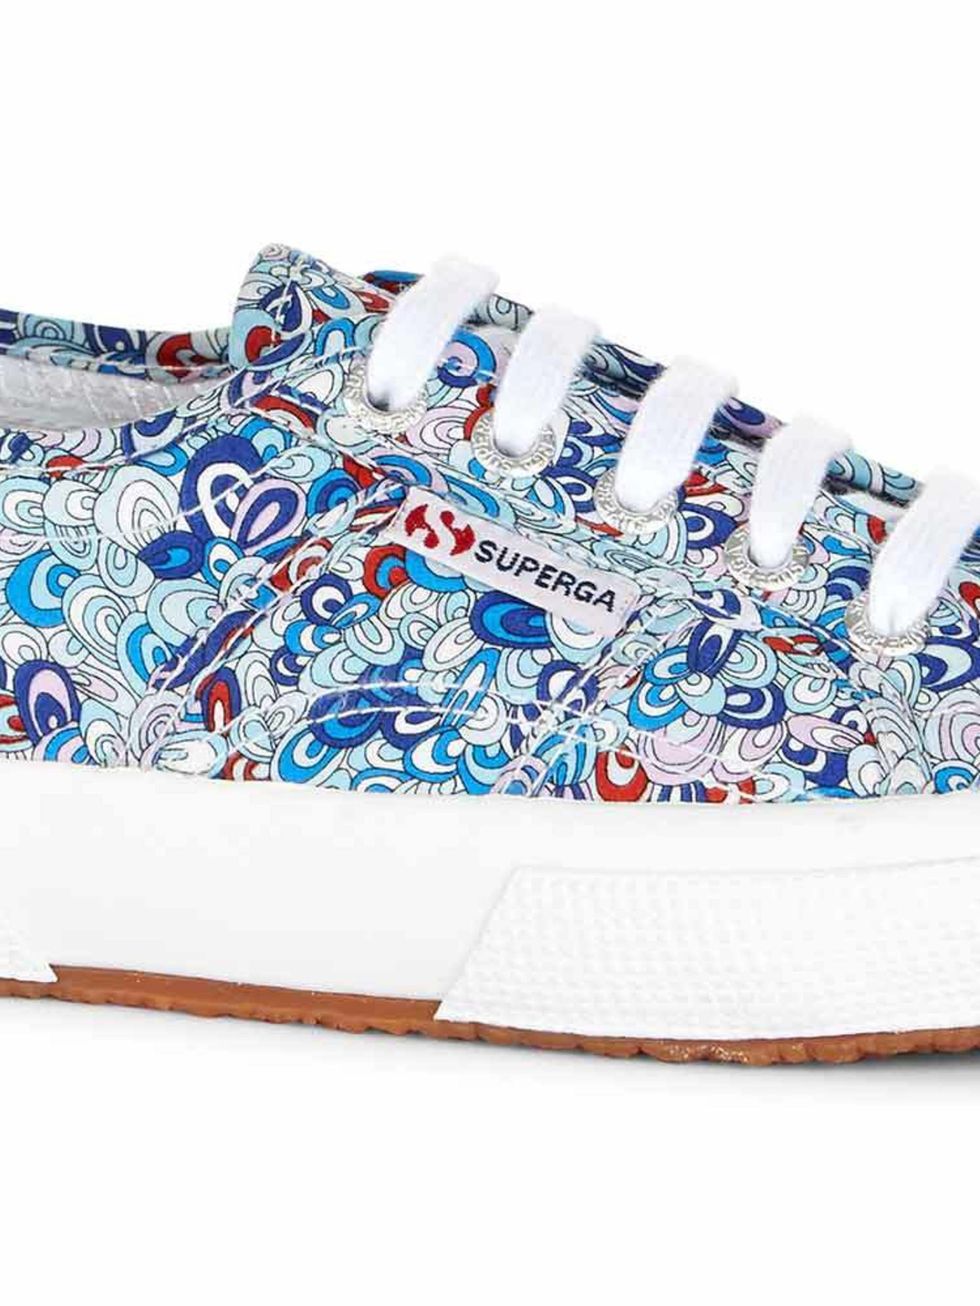 <p>Superga x Liberty </p>

<p>Two iconic brands come together for a spring summer pairing, the classic shoe gets a sloral redesign with 4 exclsuive Liberty prints. </p>

<p>Available at Schuh and <a href="https://www.superga.co.uk/browse/Womens/c-Designer